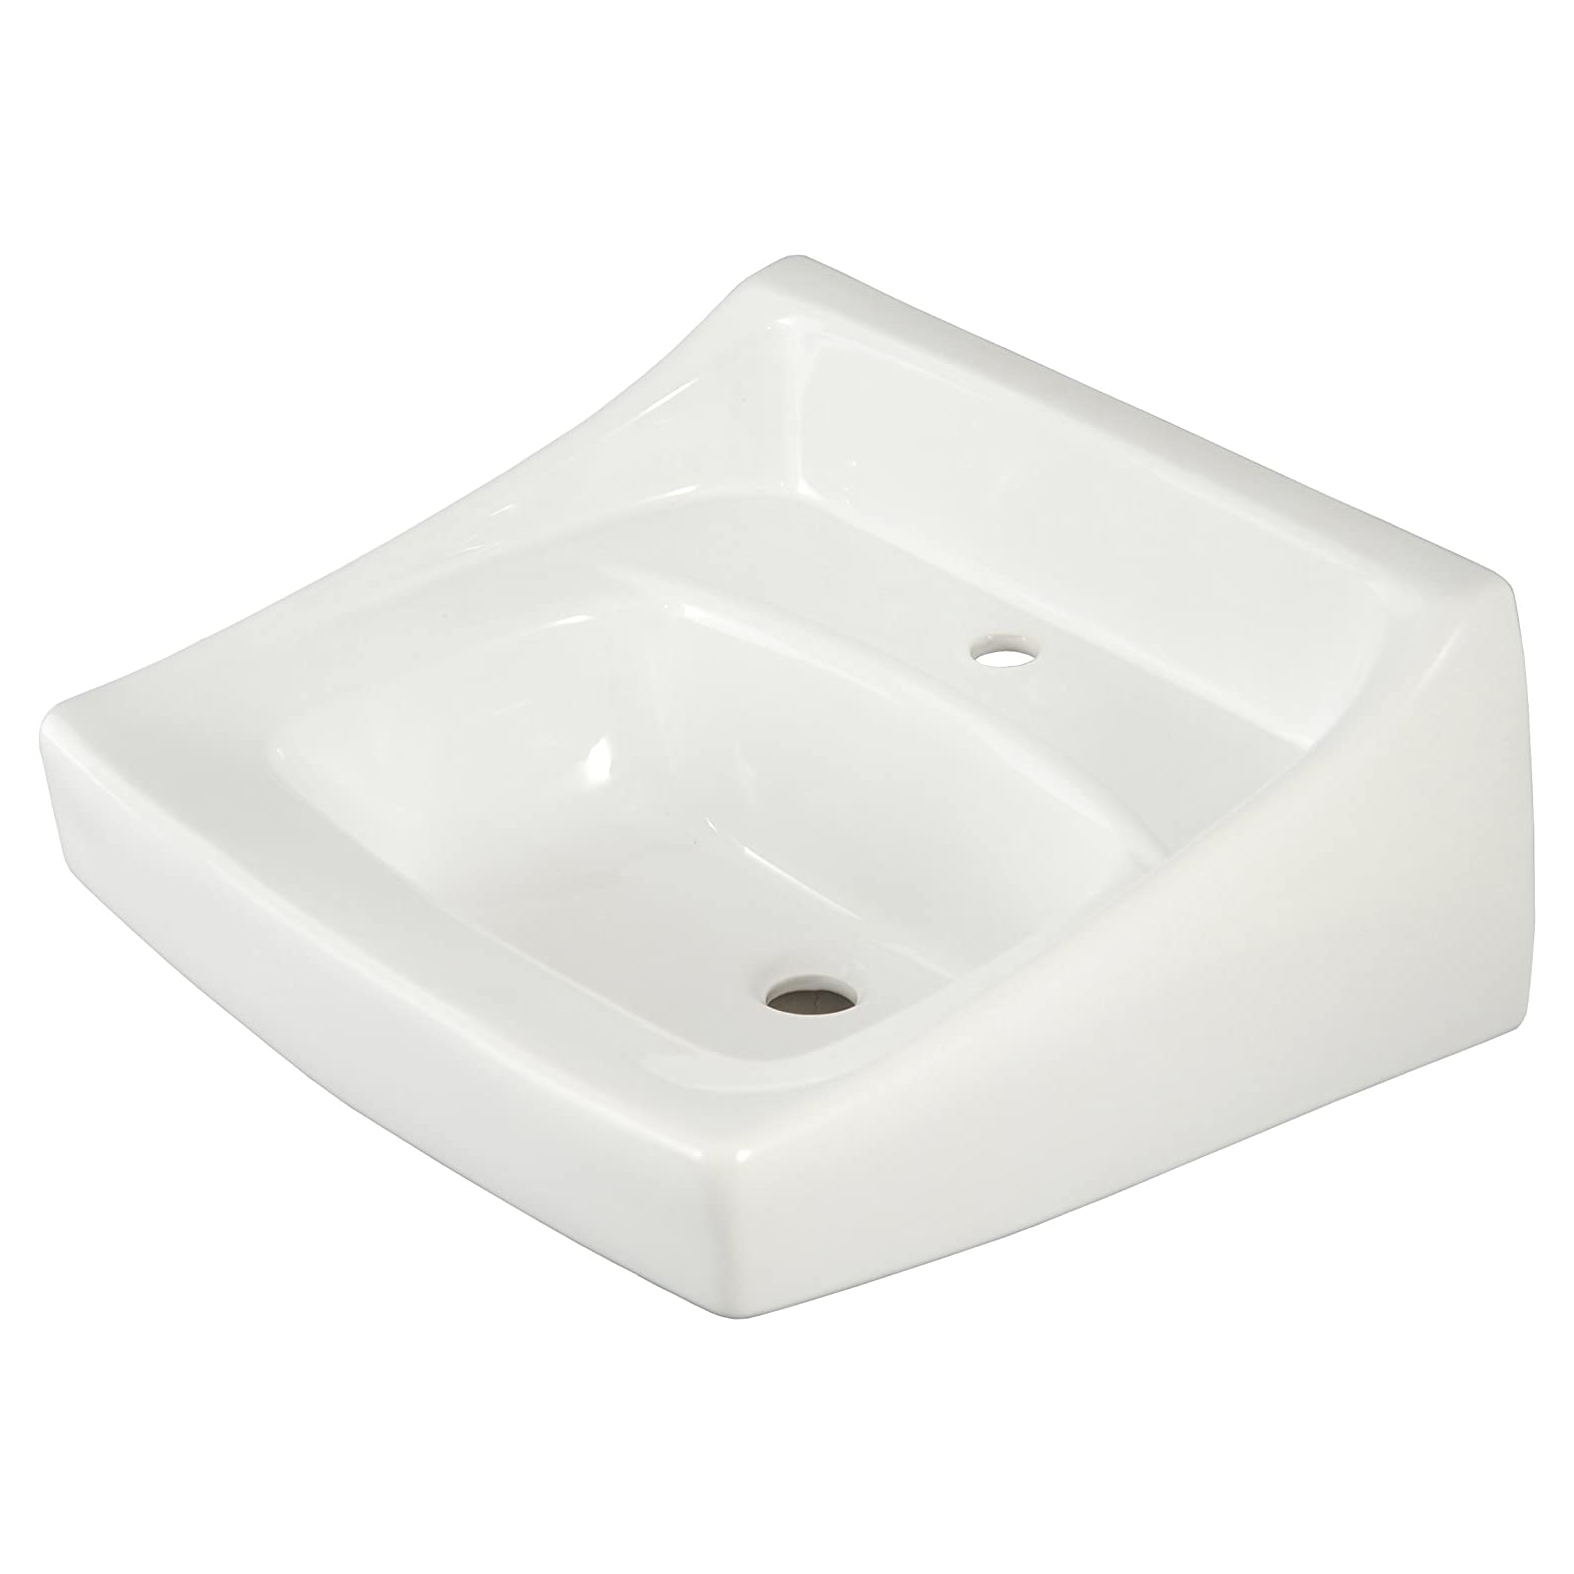 Wall 20-7/8x18" Lav Sink w/1 Faucet Hole in Cotton White